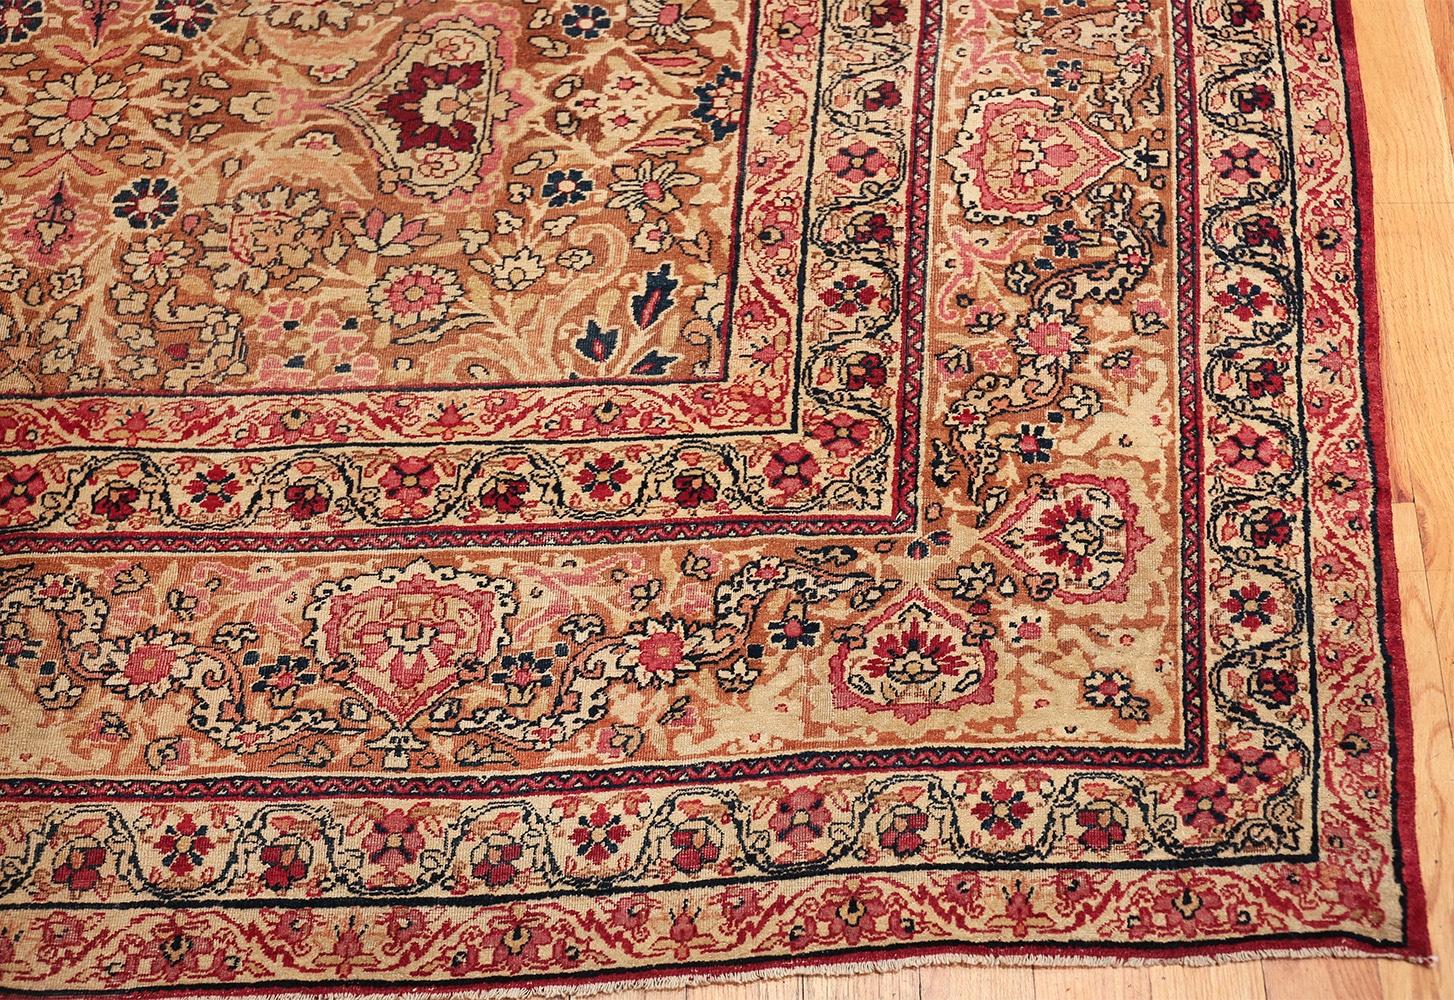 Hand-Knotted Antique Persian Kerman Carpet. Size: 11' 6